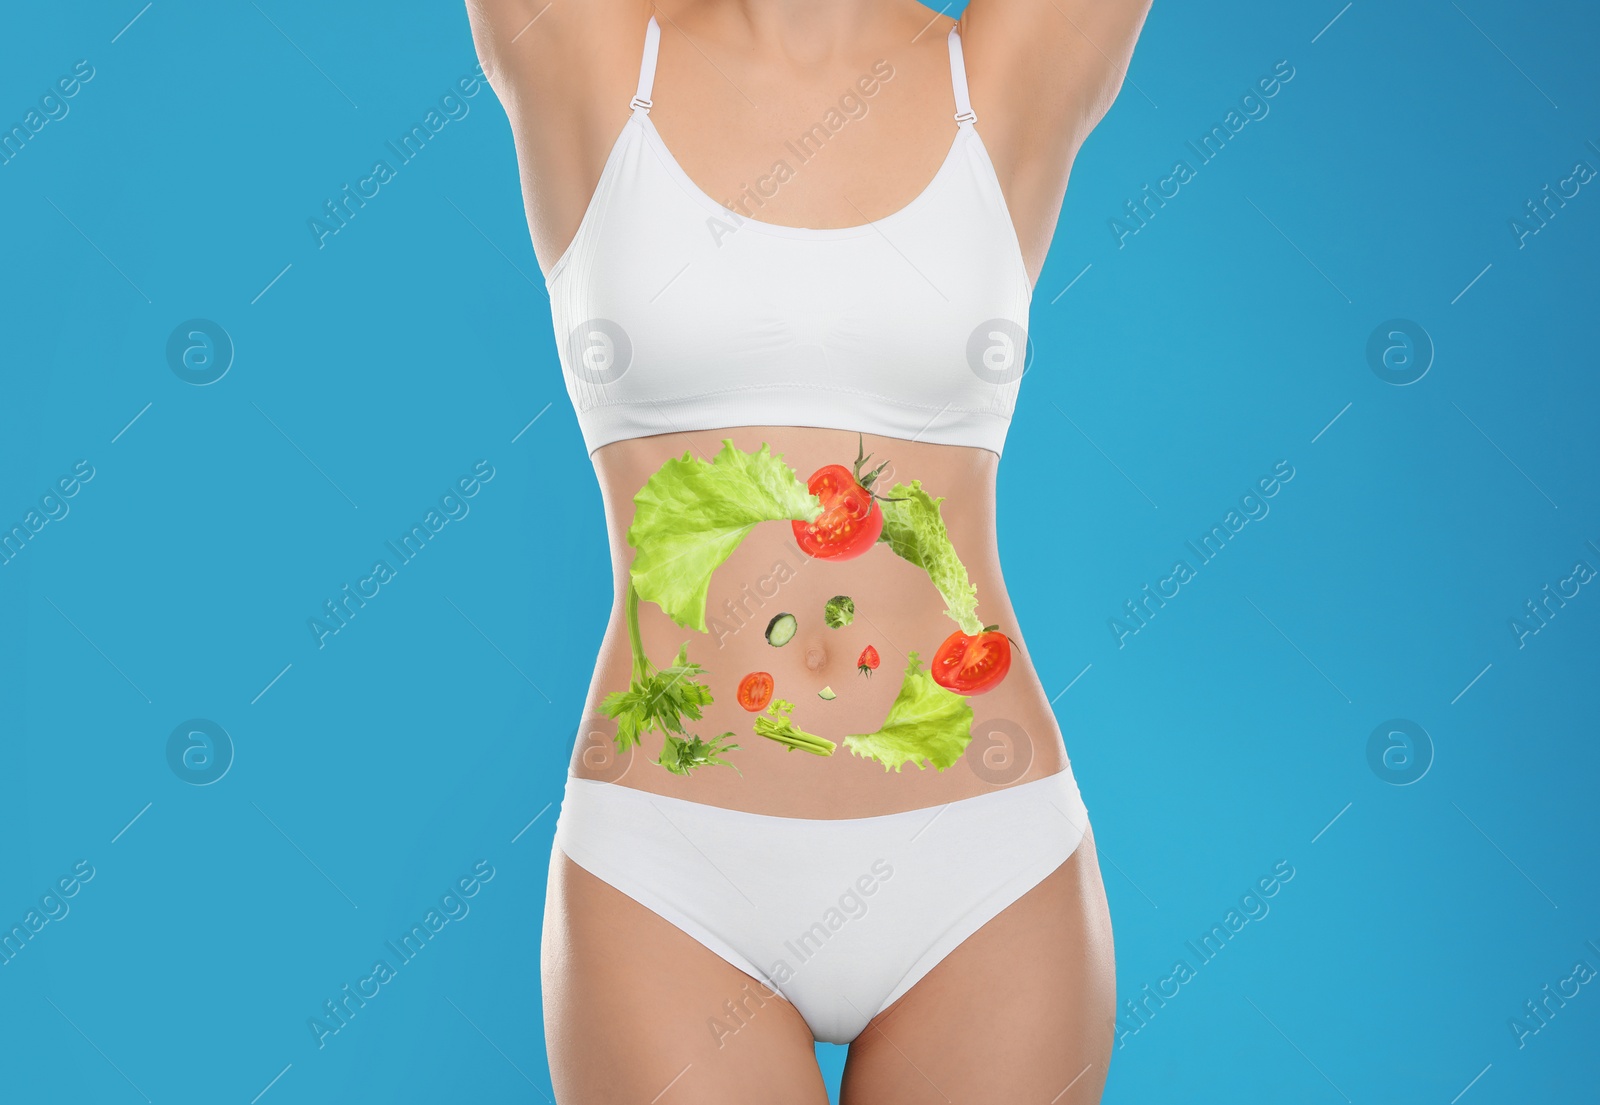 Image of Slim young woman and images of vegetables on her belly against light blue background. Healthy eating